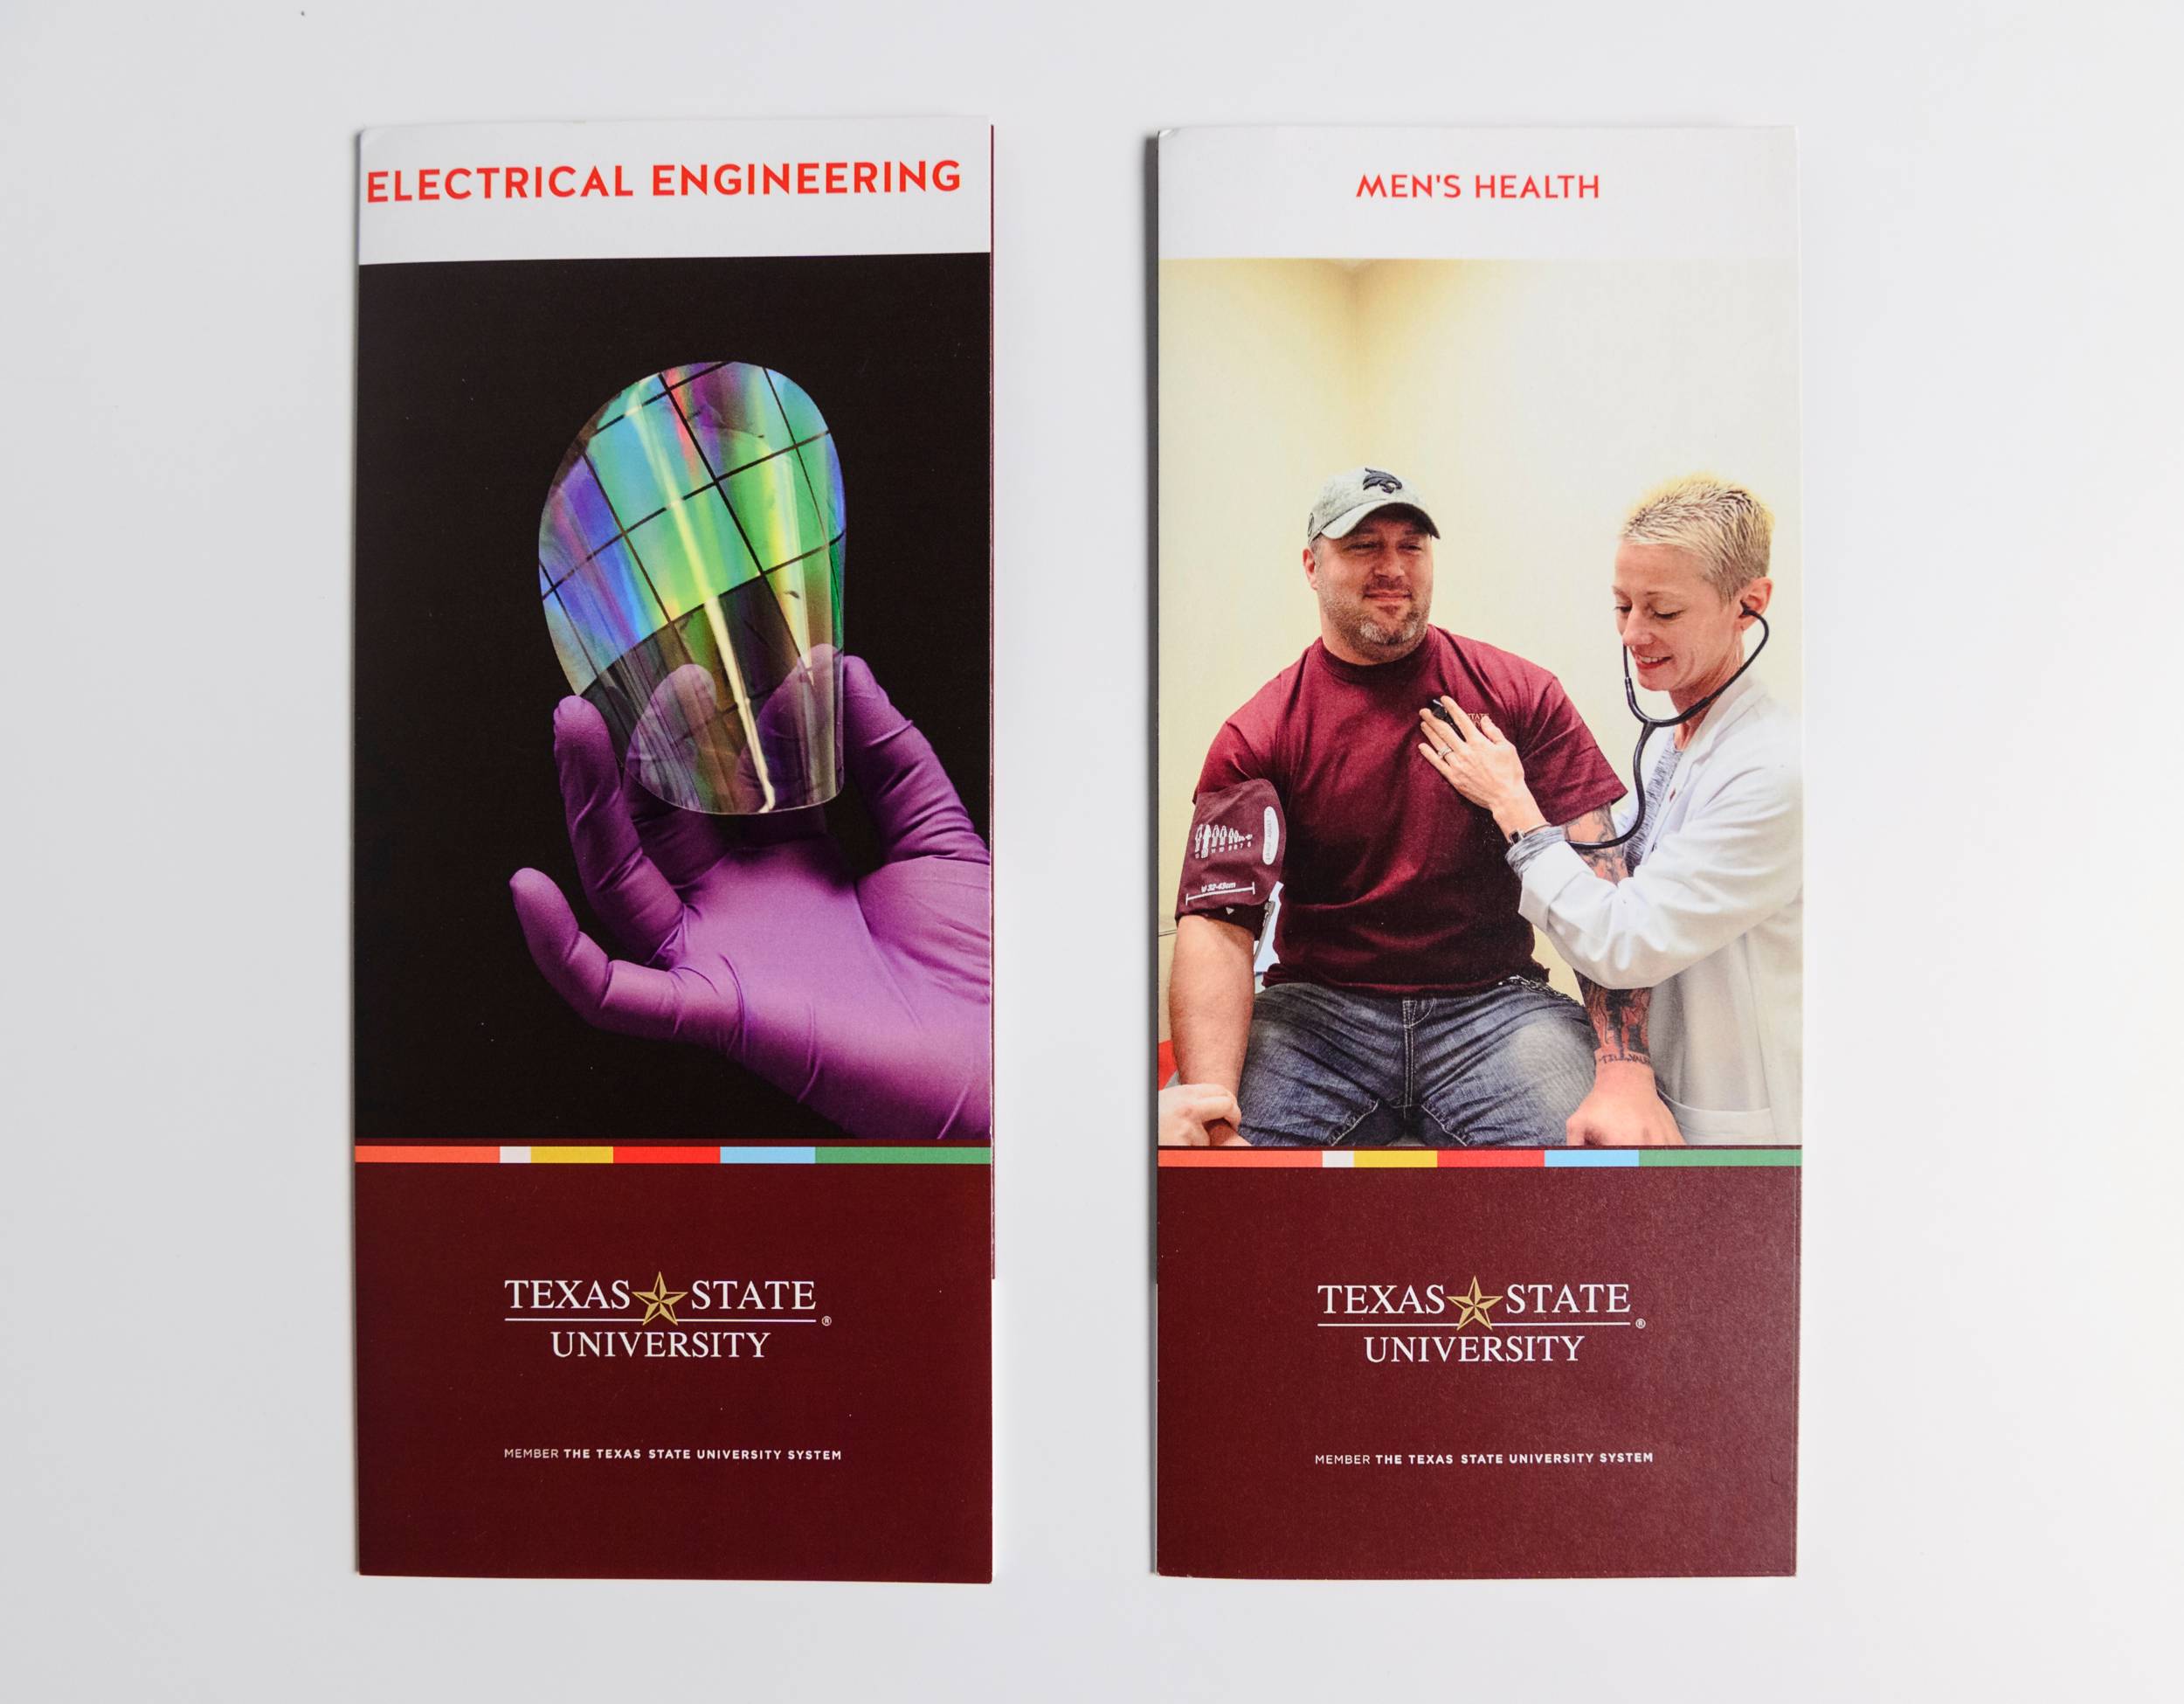 Brochures about electrical engineering and men's health programs made with templates